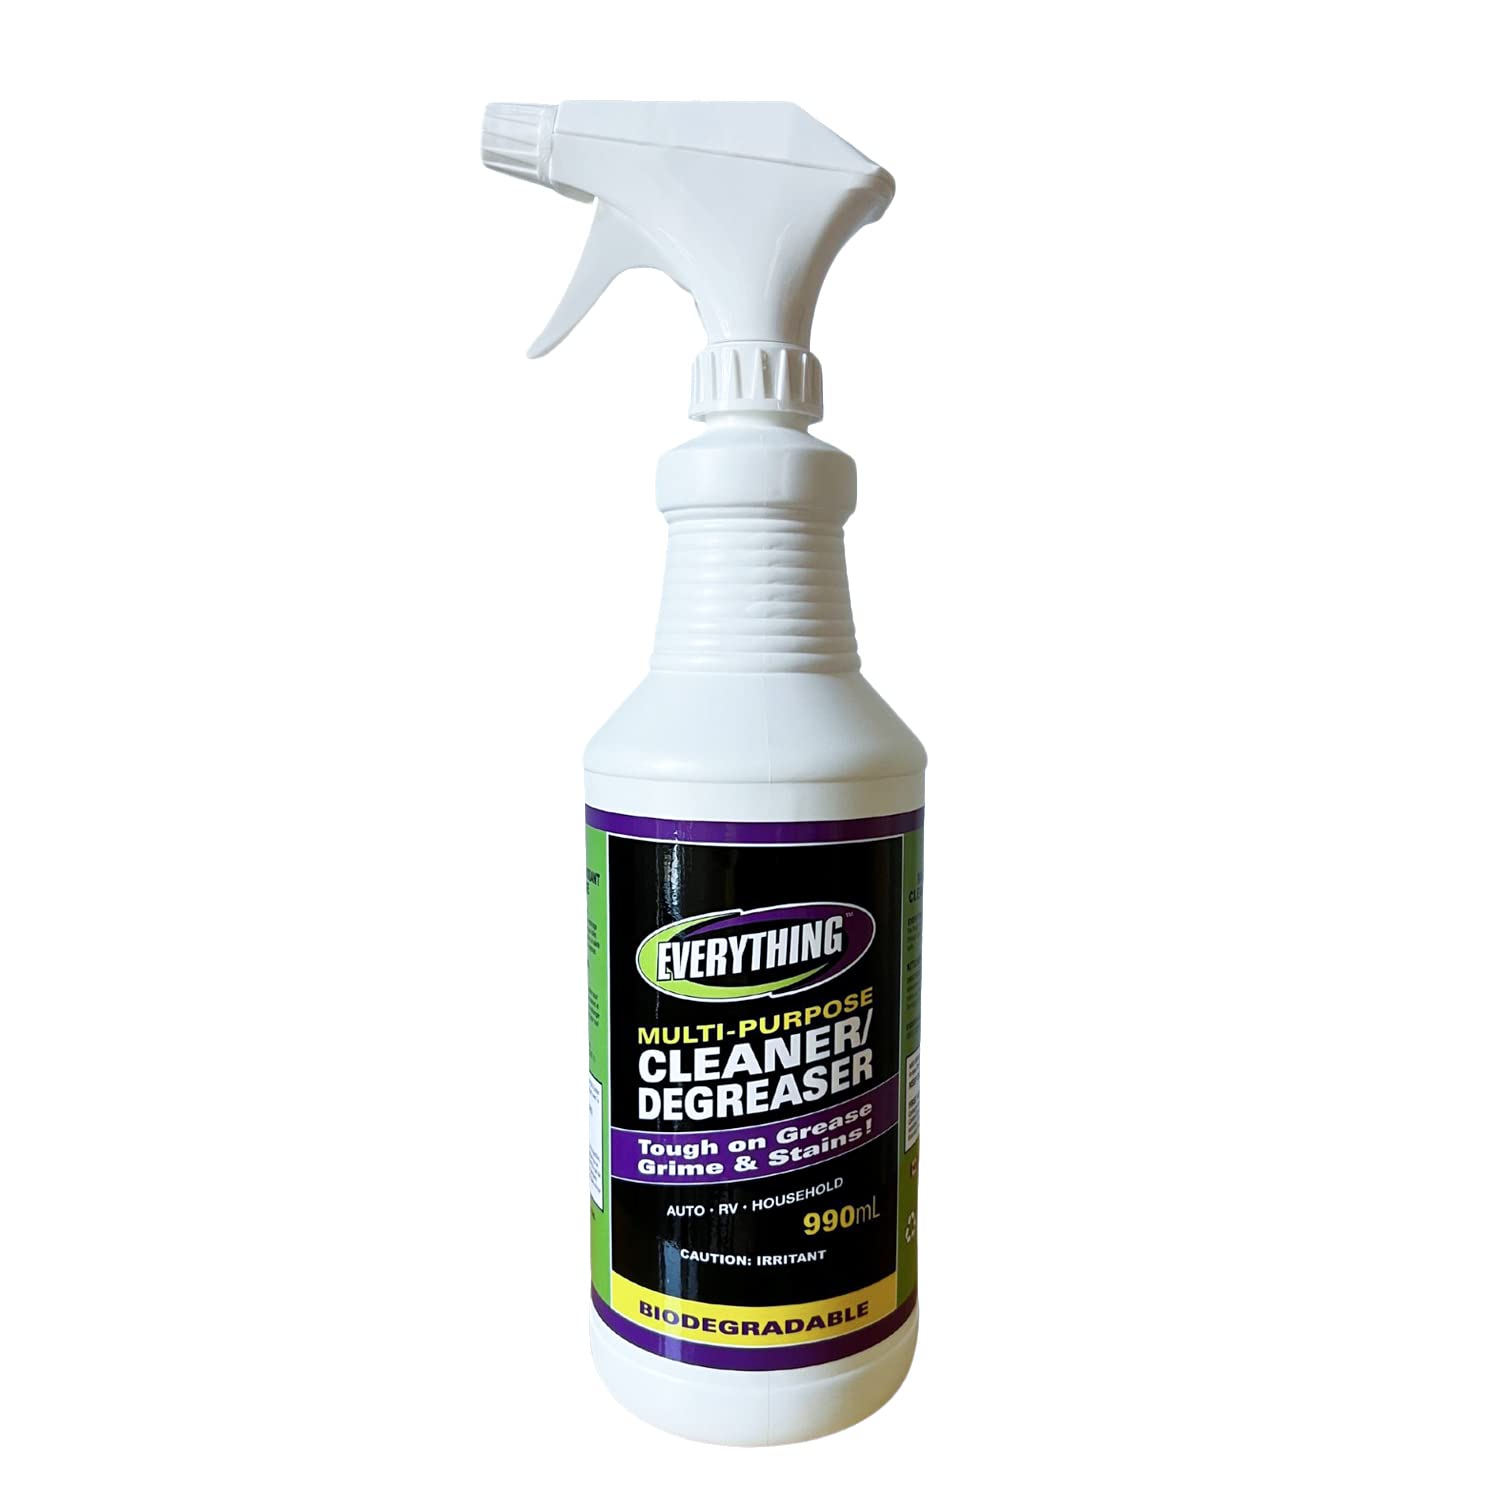 SuperClean Multi-Surface All Purpose Cleaner Degreaser Spray,  Biodegradable, Full Concentrate, Scent Free, 32 Ounce